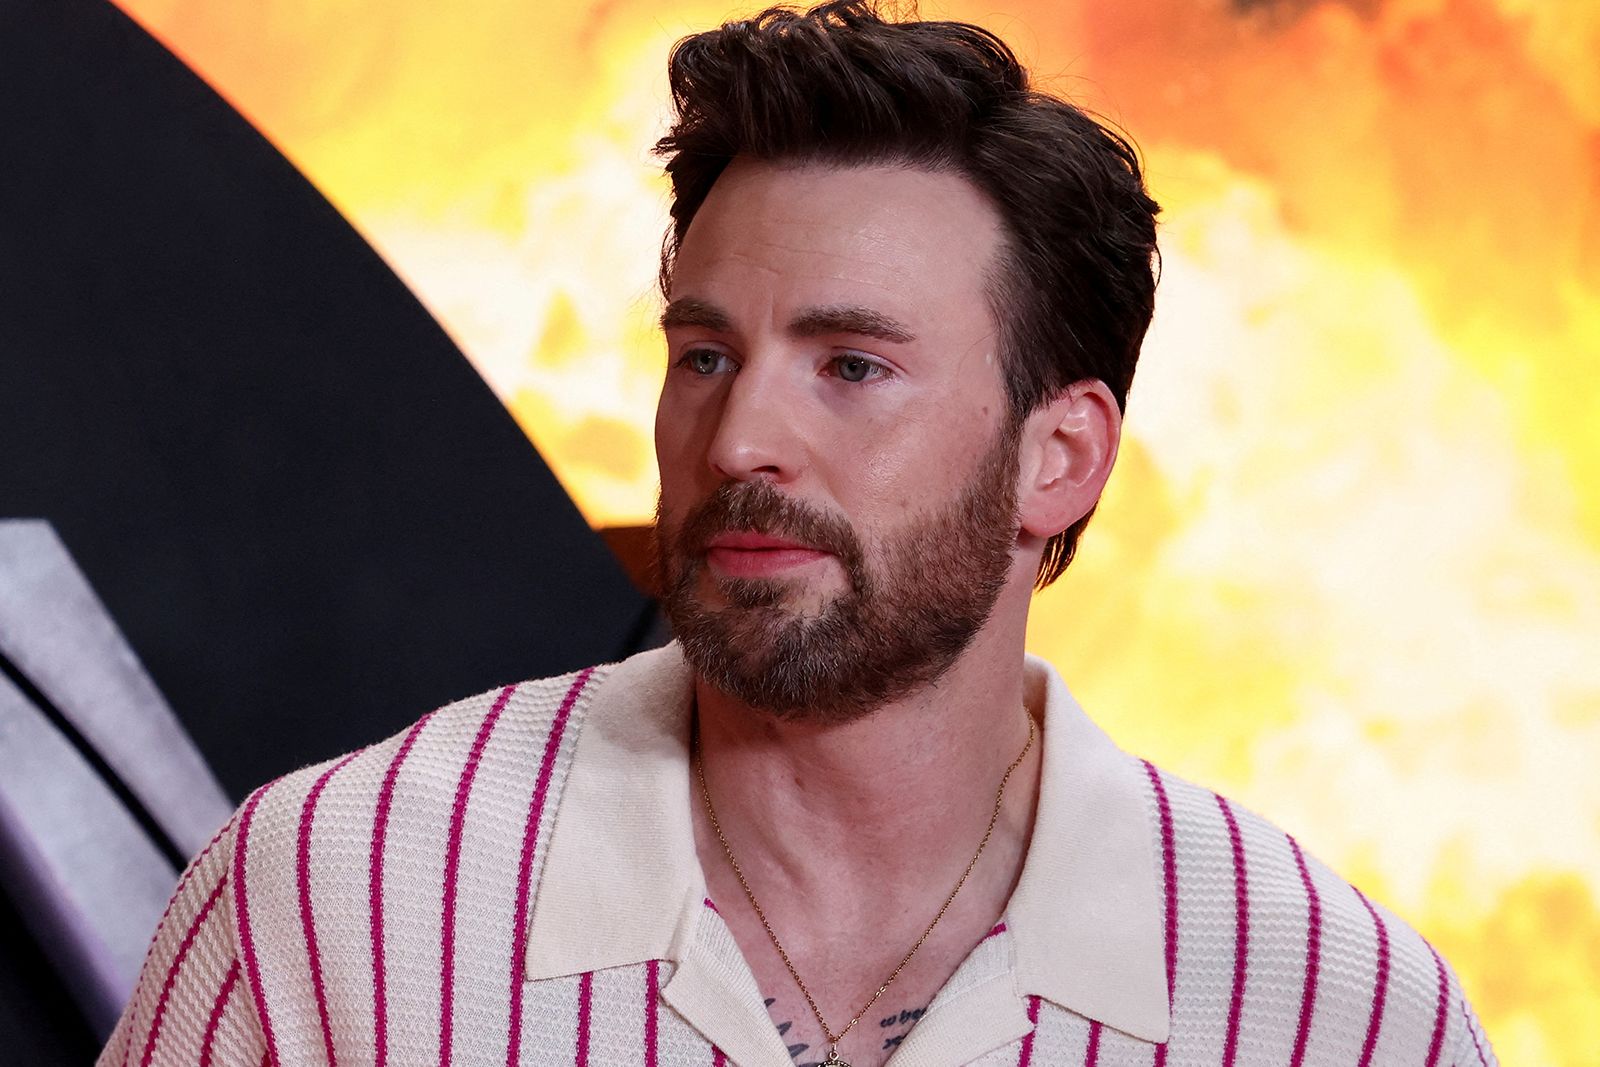 Chris Evans Is PEOPLE's Sexiest Man Alive: 'My Mom Will Be So Proud'